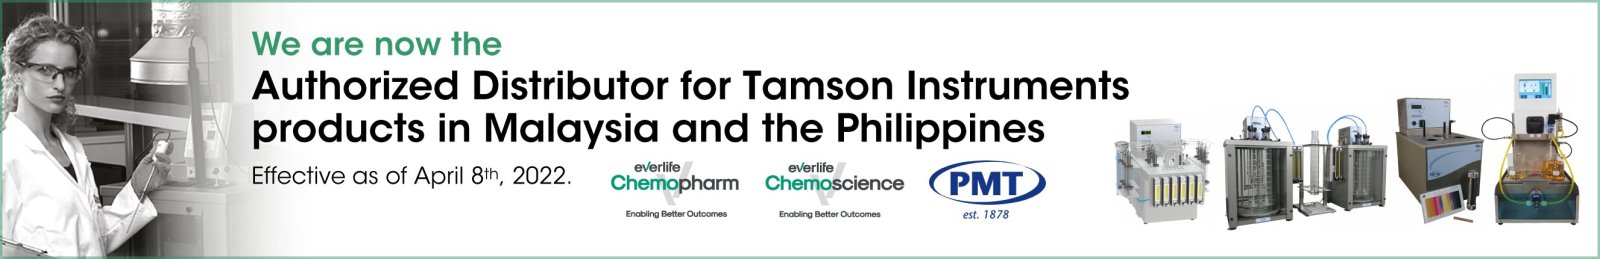 Chemopharm Group is officially the Authorized Distributor for Tamson ...